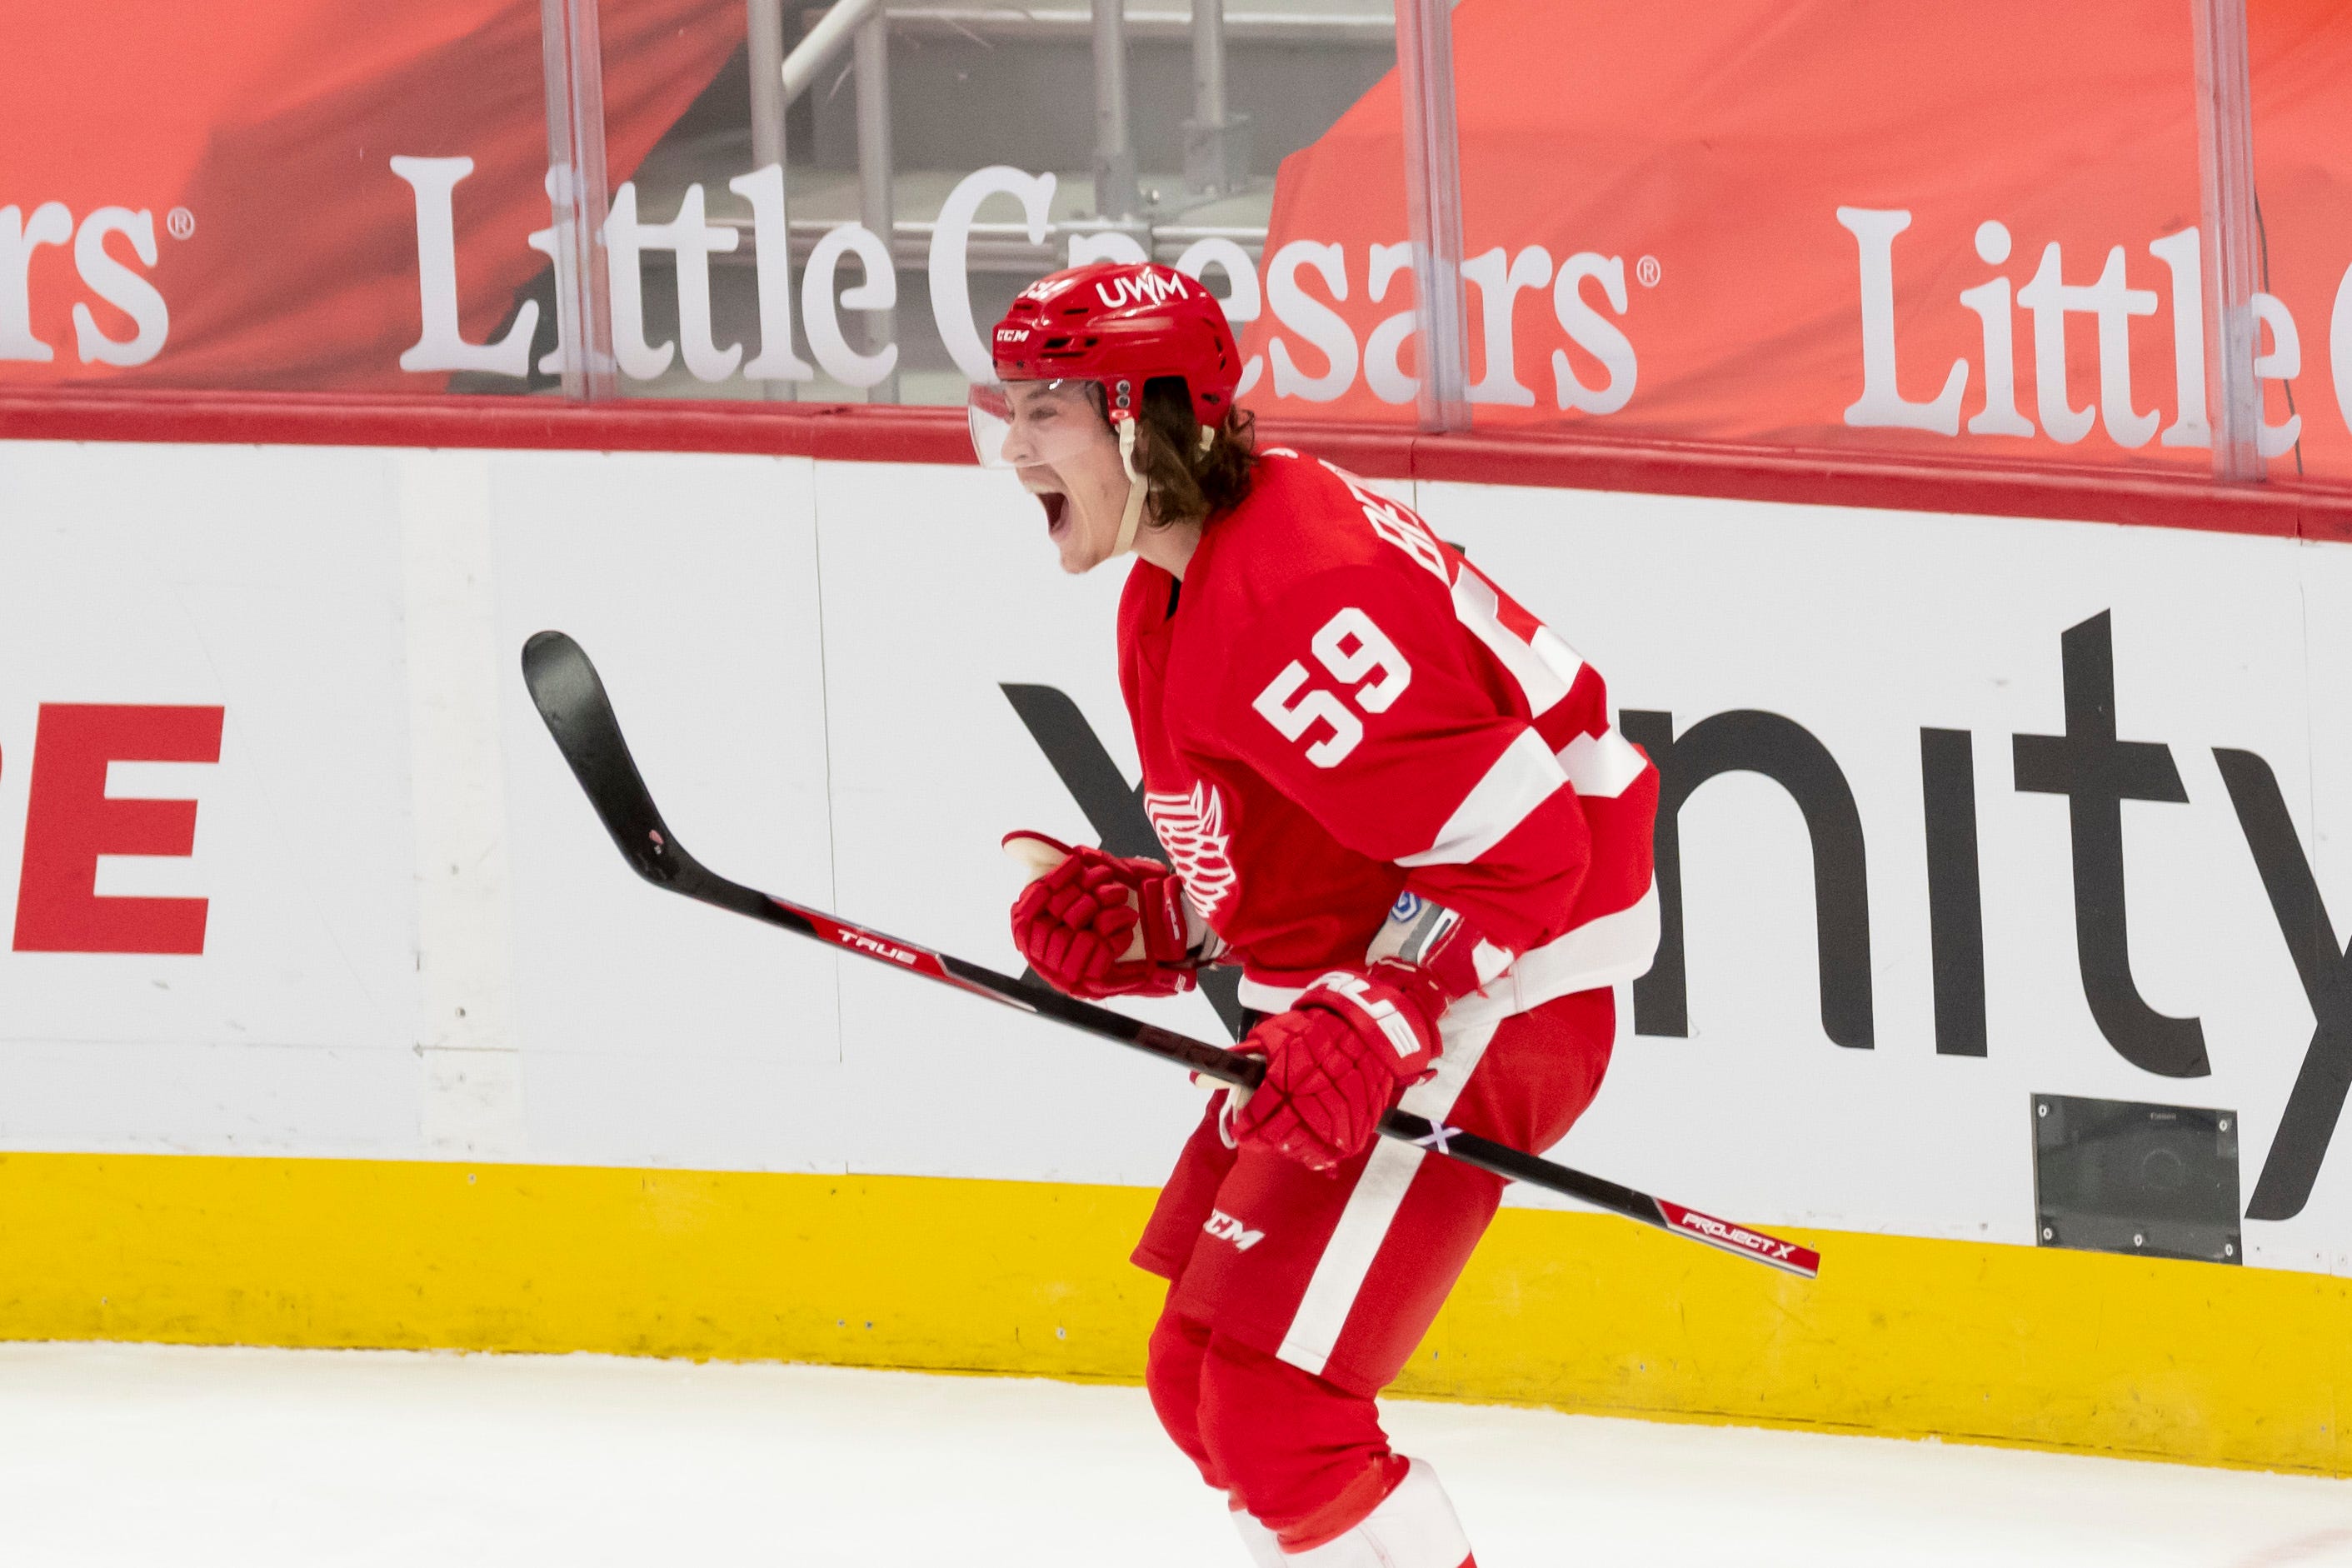 Detroit left wing Tyler Bertuzzi reacts after scoring the game-winning goal in the overtime period of a game between the Detroit Red Wings and the Columbus Blue Jackets, at Little Caesars Arena, in Detroit, January 19, 2021.